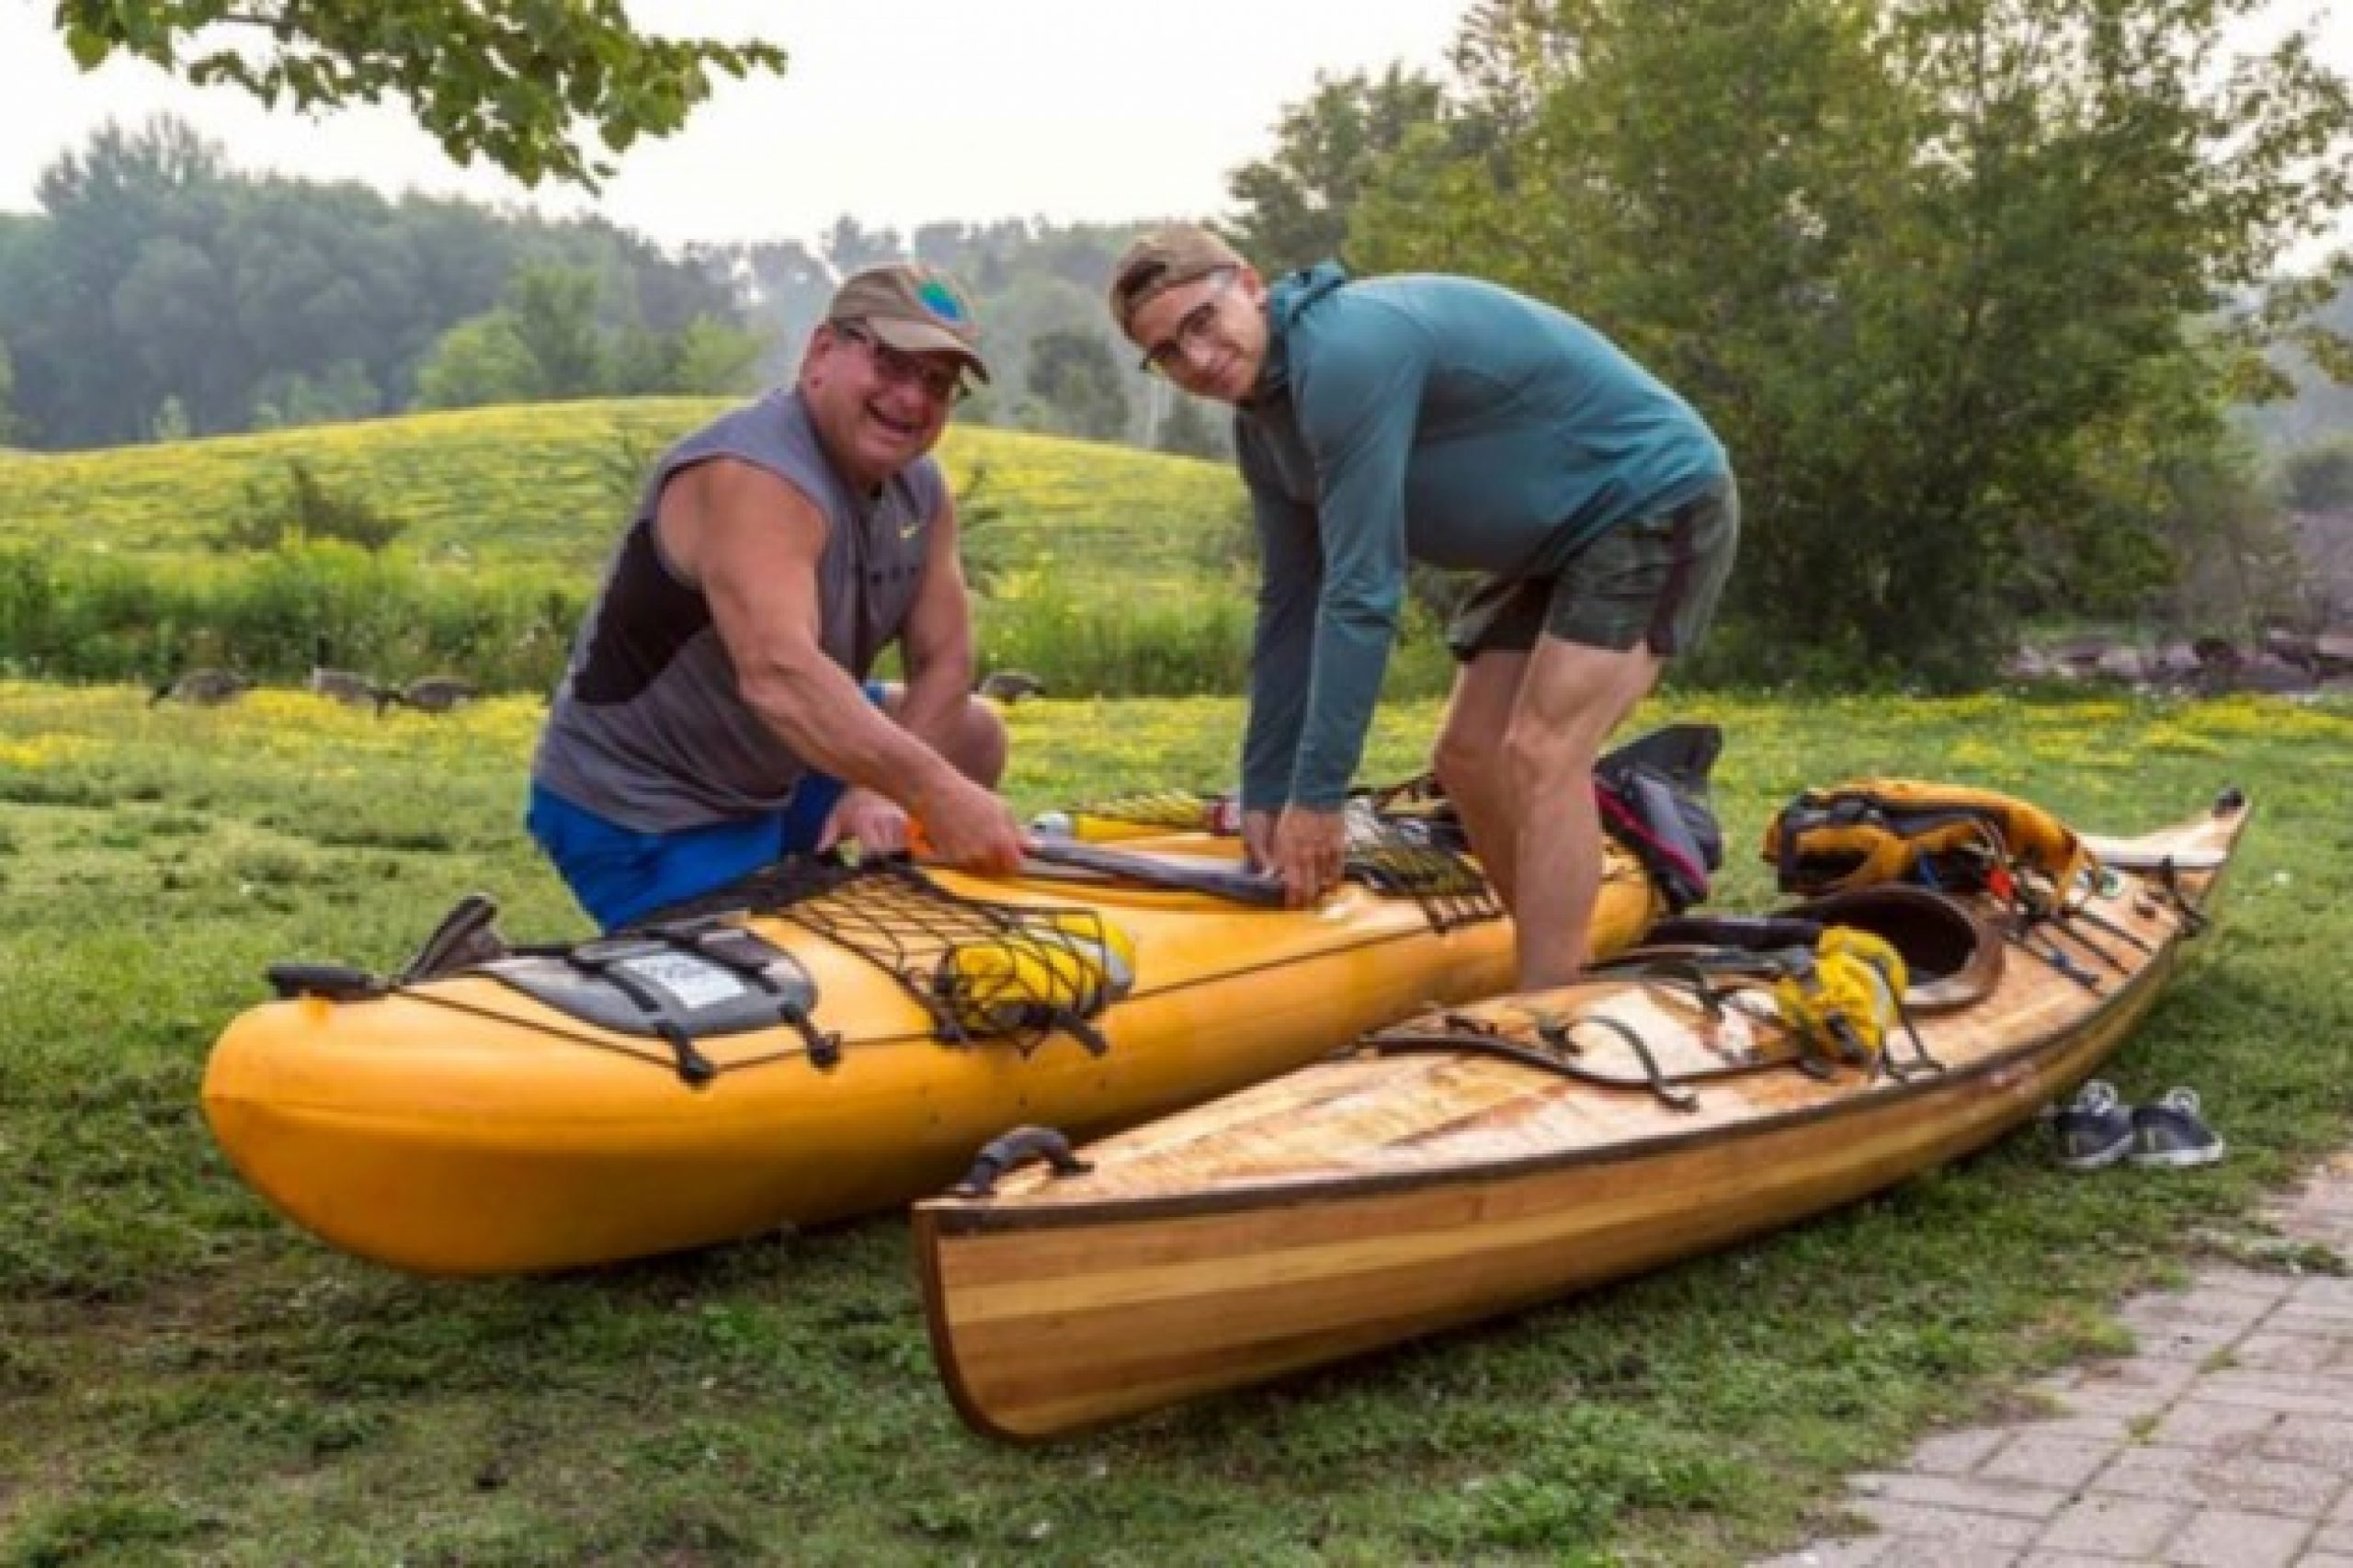 Father-son team kayaking Lake Superior for a worthy cause